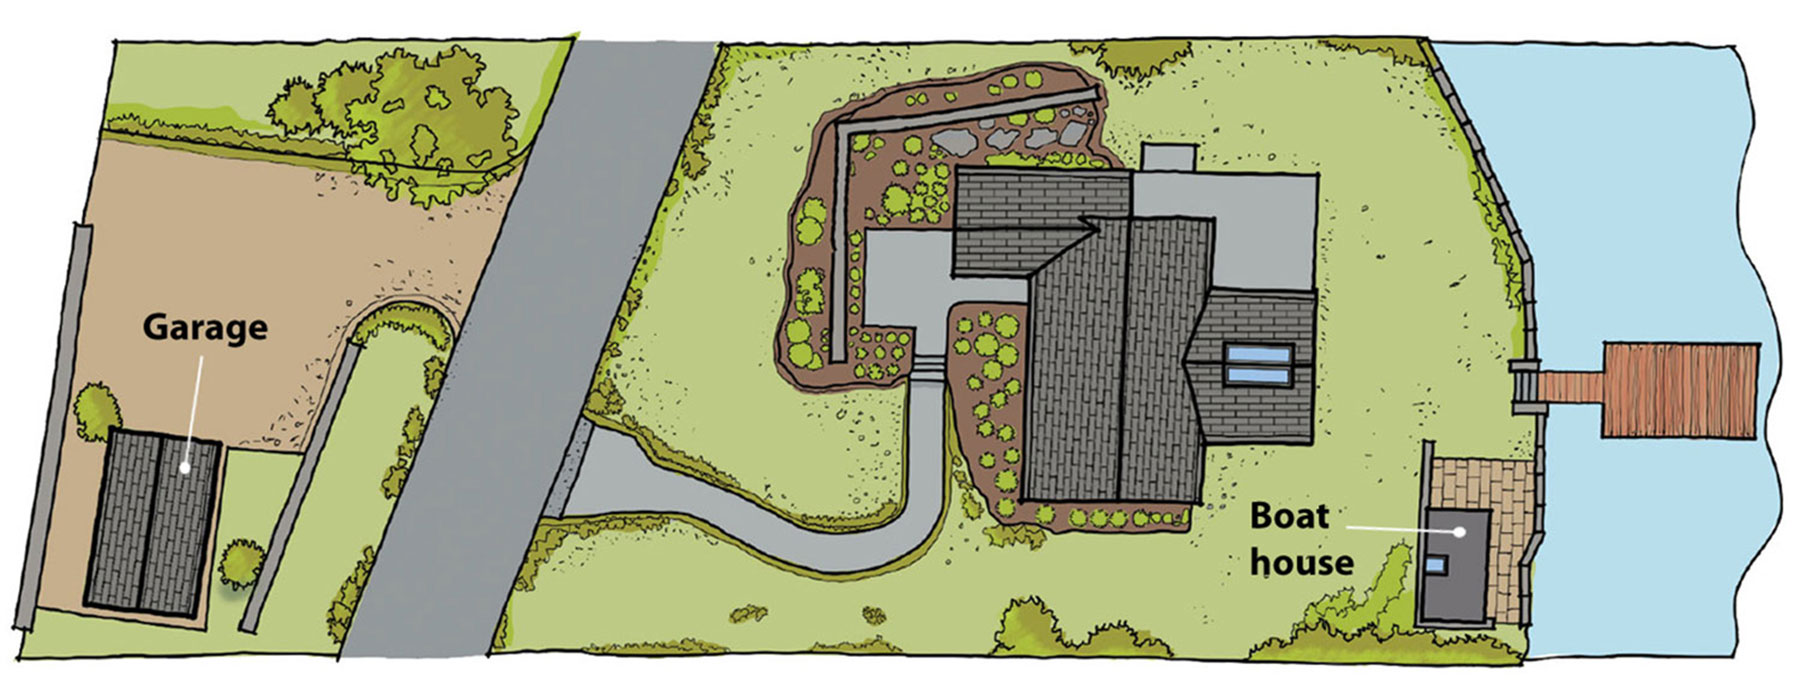 zoomed out site plan drawing